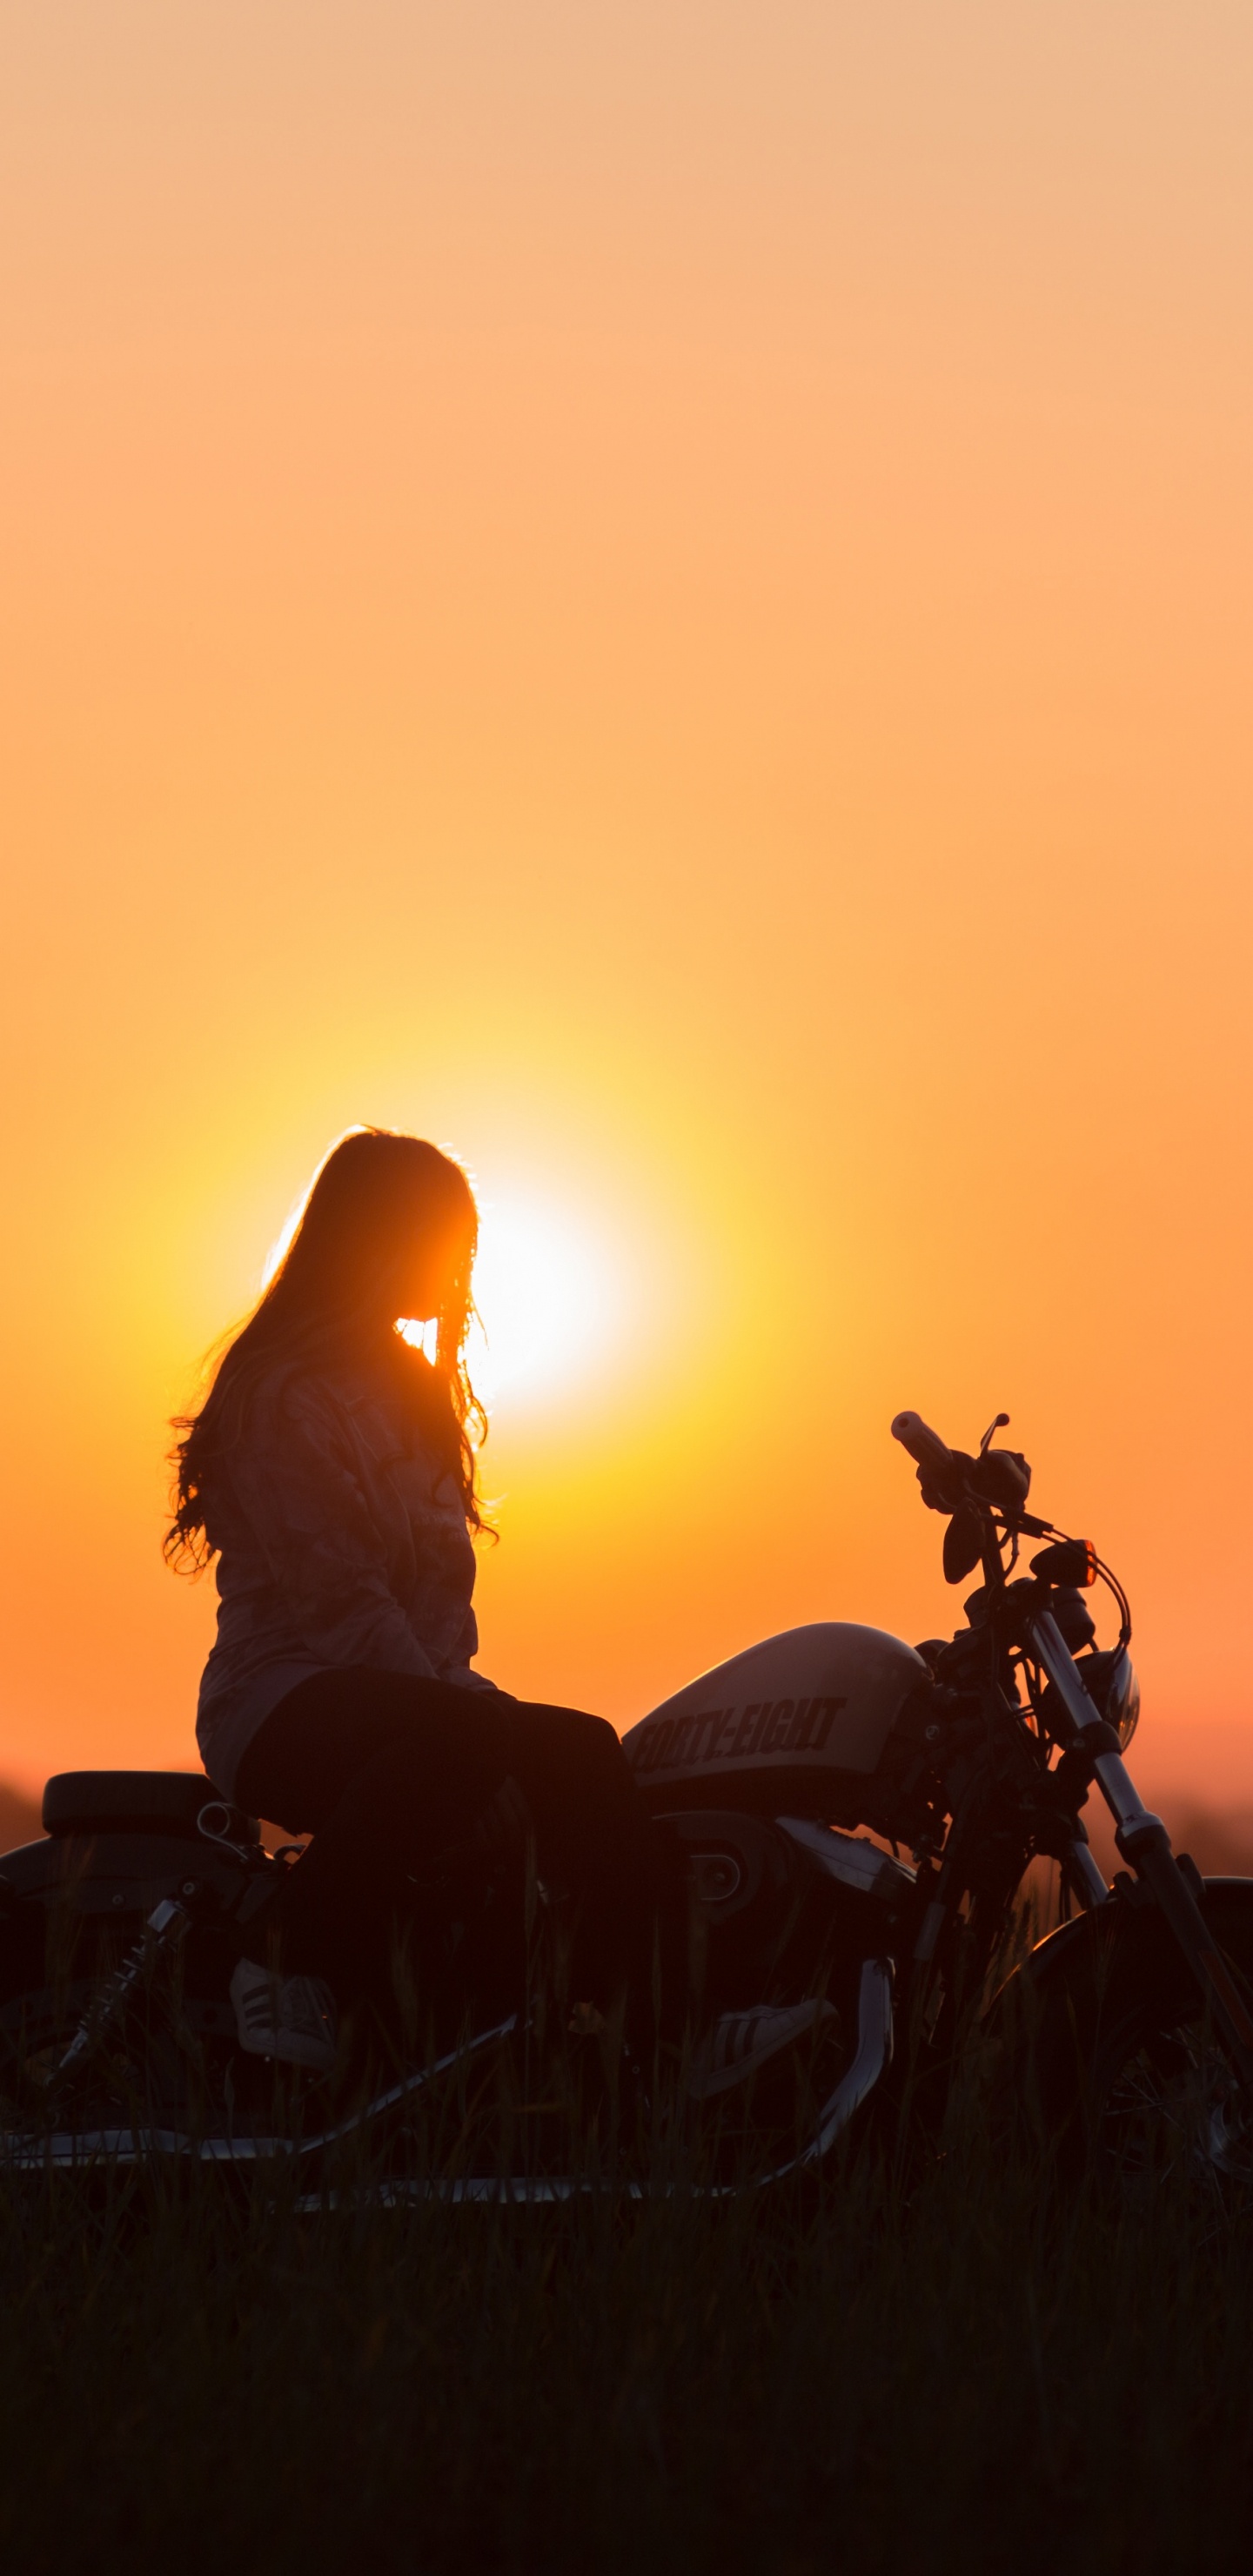 Silhouette of Man Riding Motorcycle During Sunset. Wallpaper in 1440x2960 Resolution